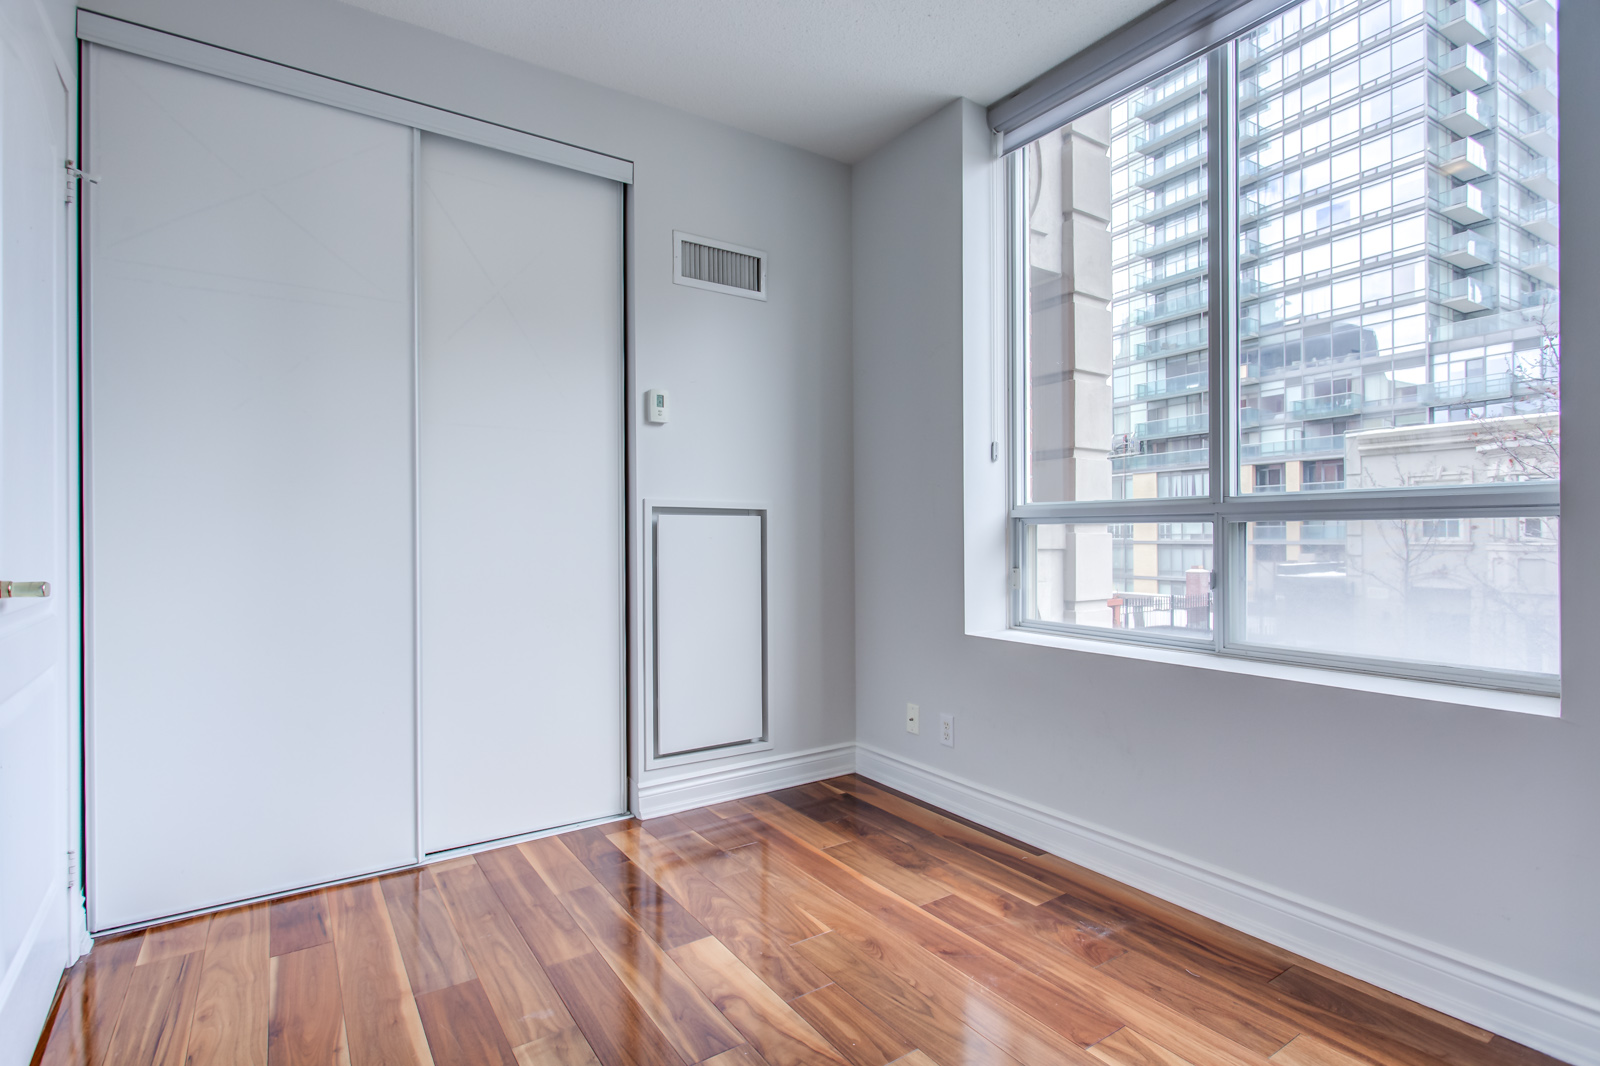 Small empty bedroom with shiny brown hardwood floors and large window showing building.